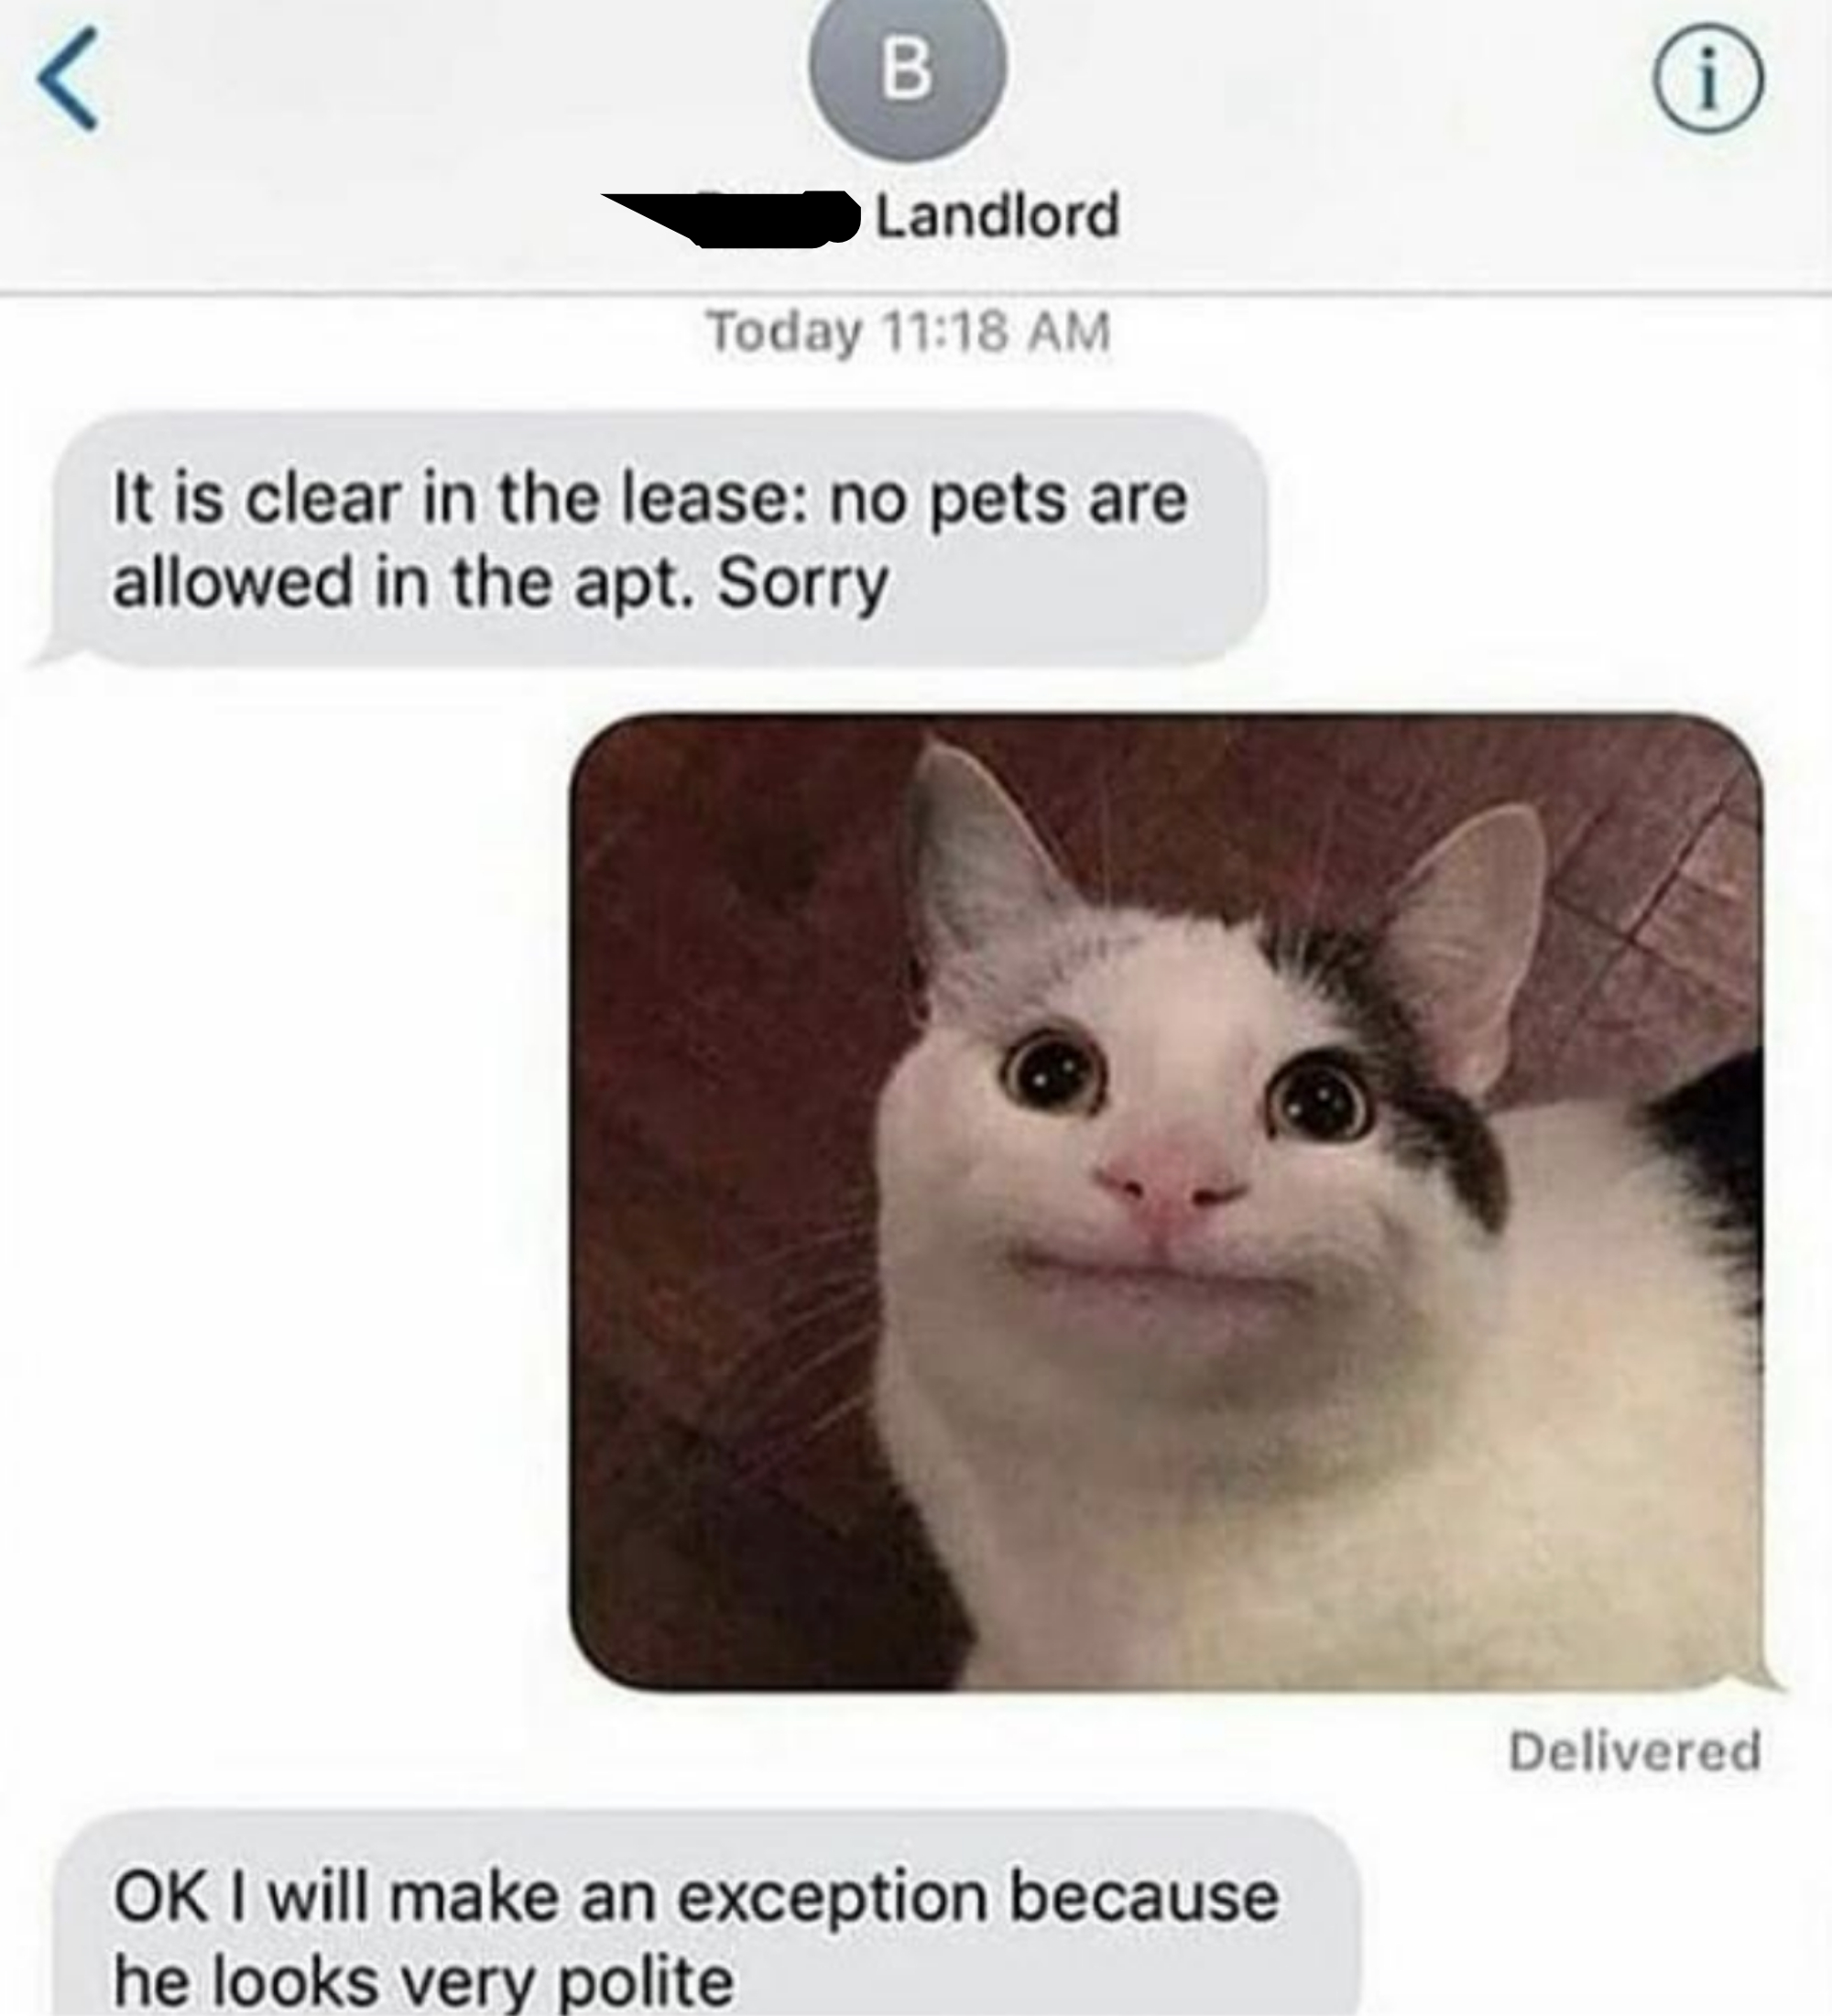 landlord allowing the cat because he looks polite